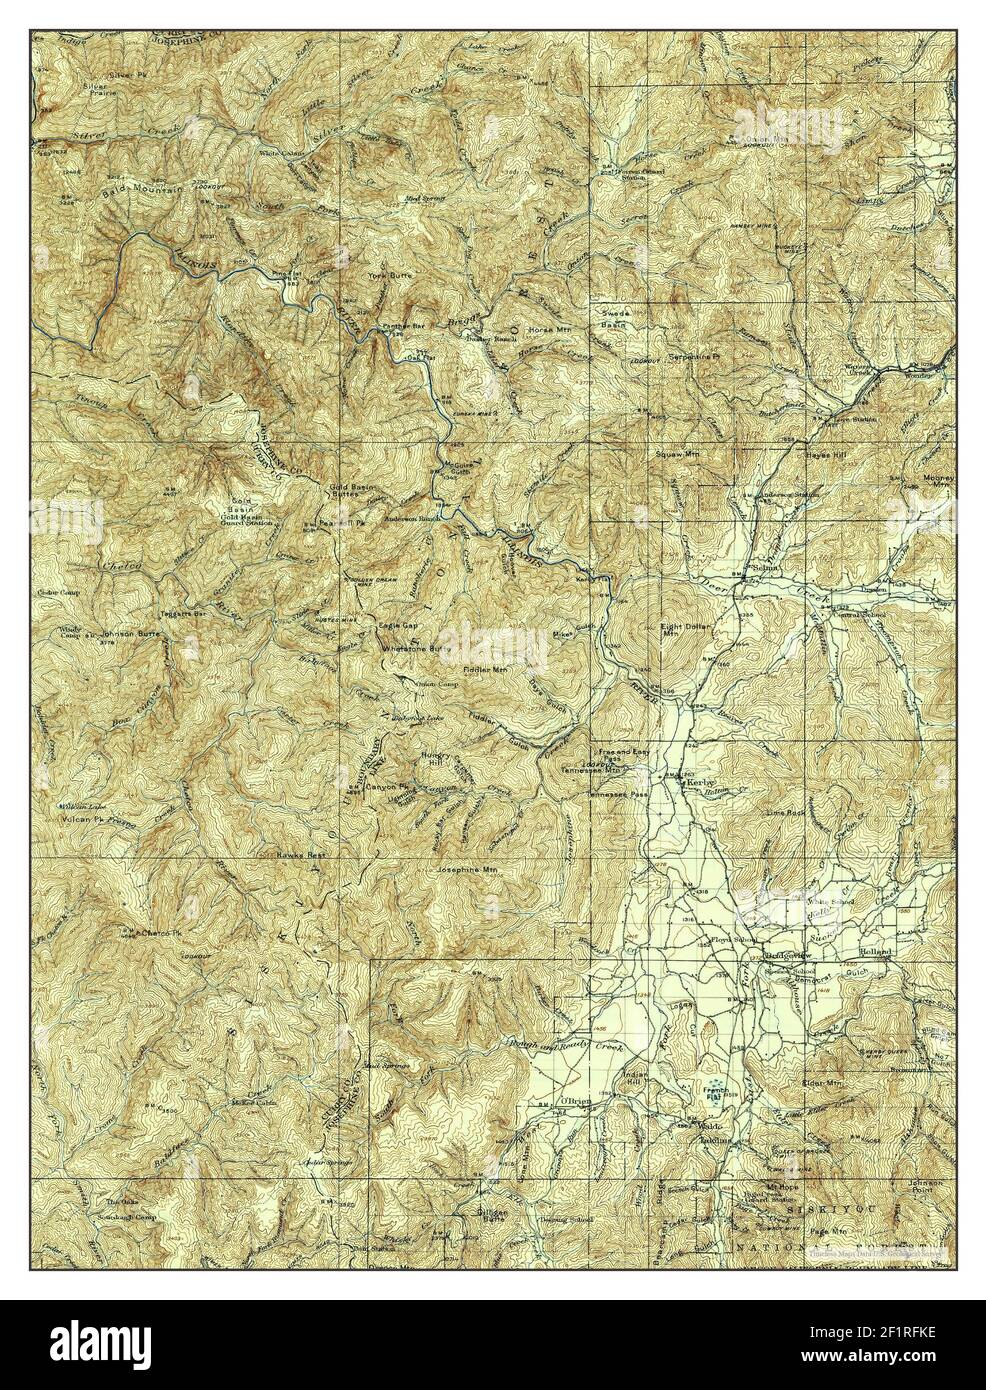 Kerby, Oregon, map 1917, 1:125000, United States of America by Timeless Maps, data U.S. Geological Survey Stock Photo